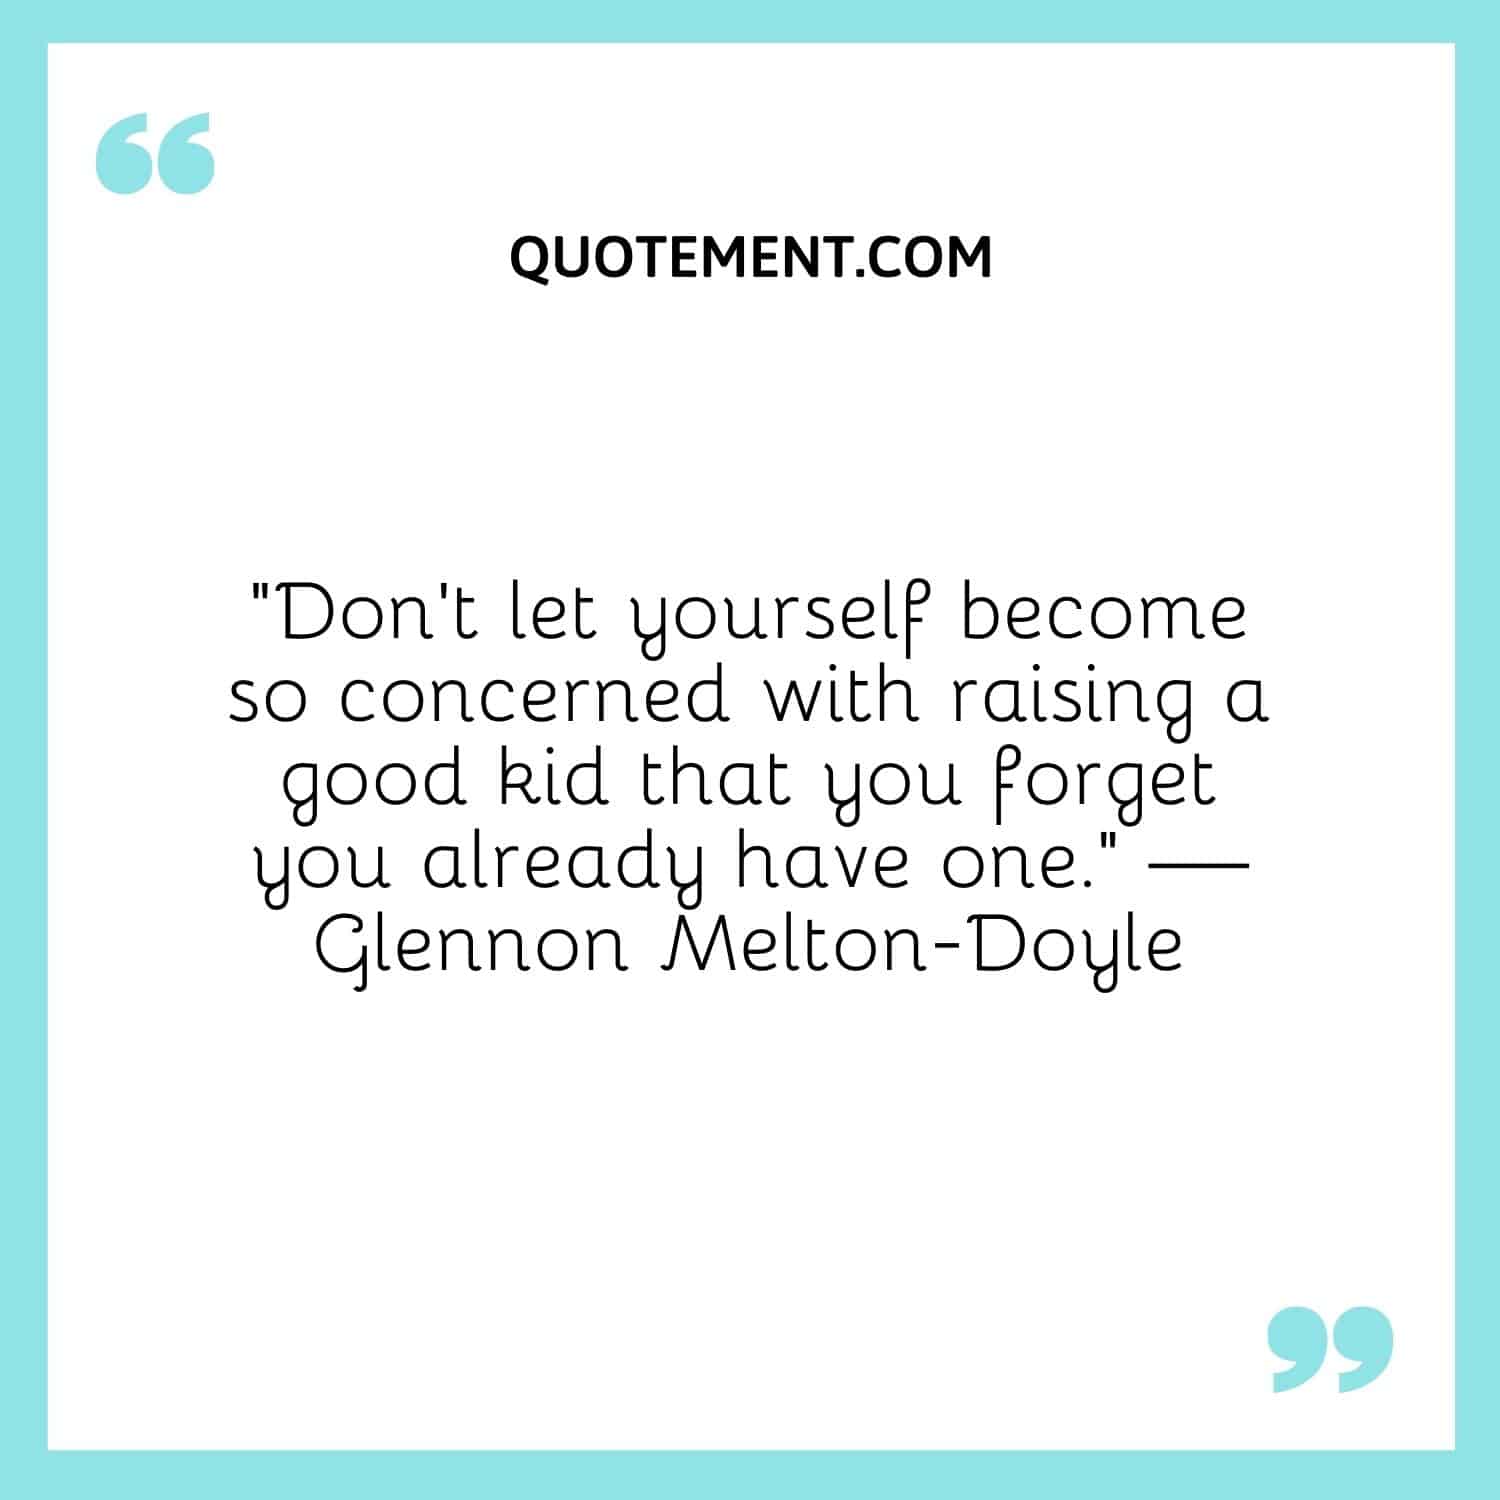 “Don’t let yourself become so concerned with raising a good kid that you forget you already have one.” — Glennon Melton-Doyle